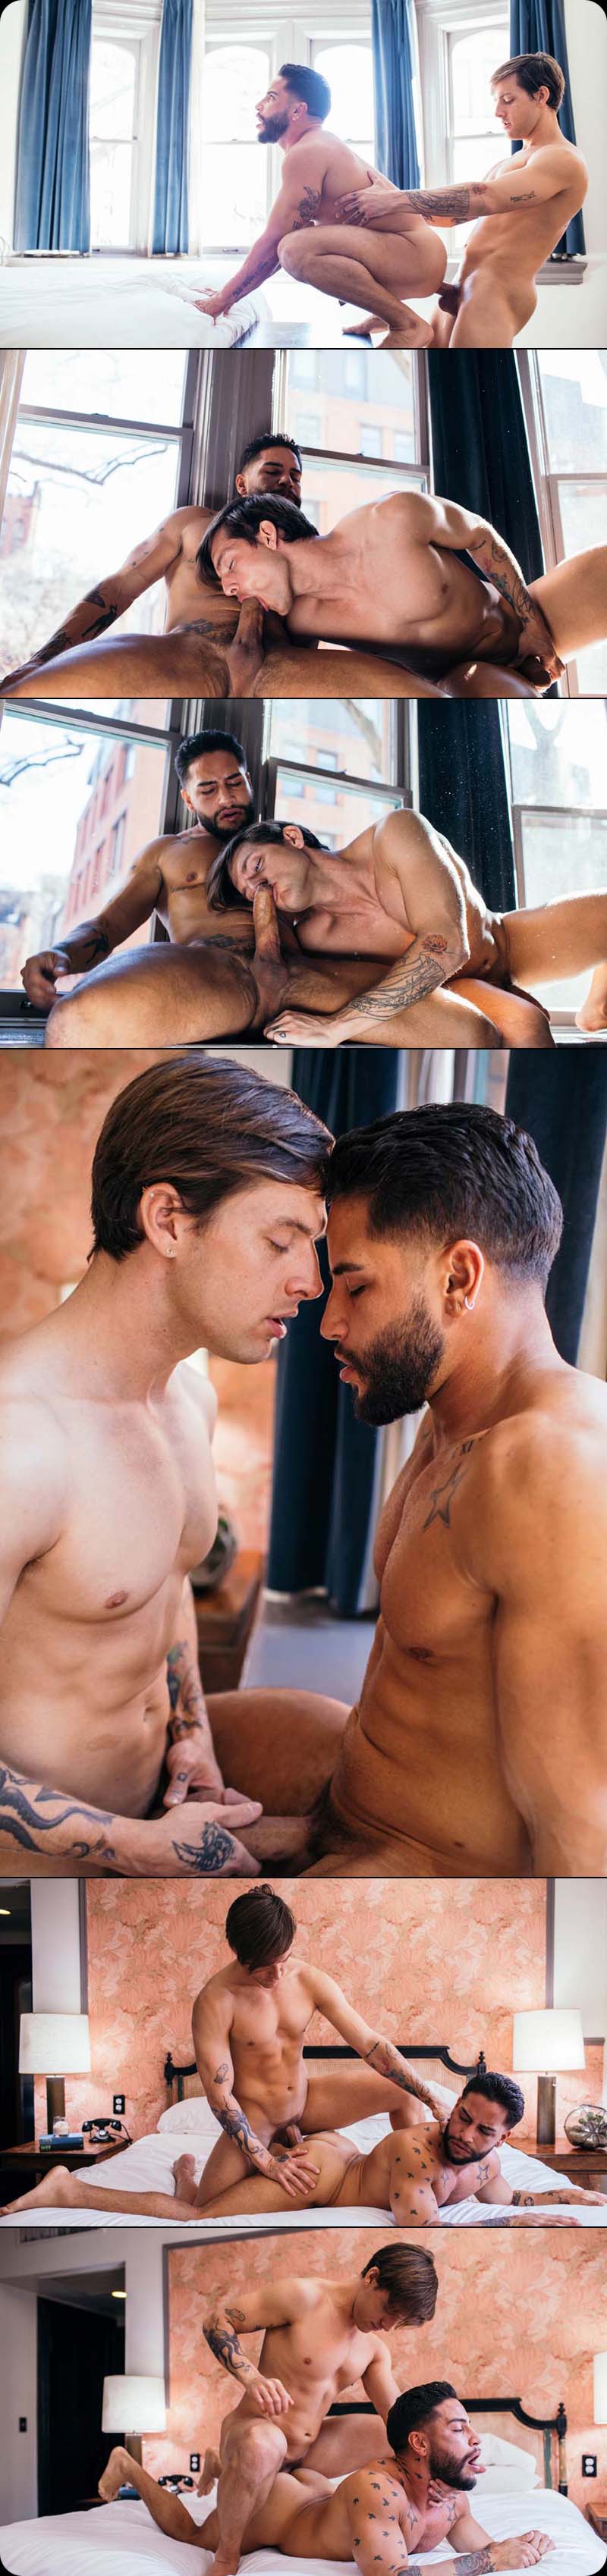 Tayte Hanson Fucks Brock Banks in 'Lucky In Love: Finale' at CockyBoys